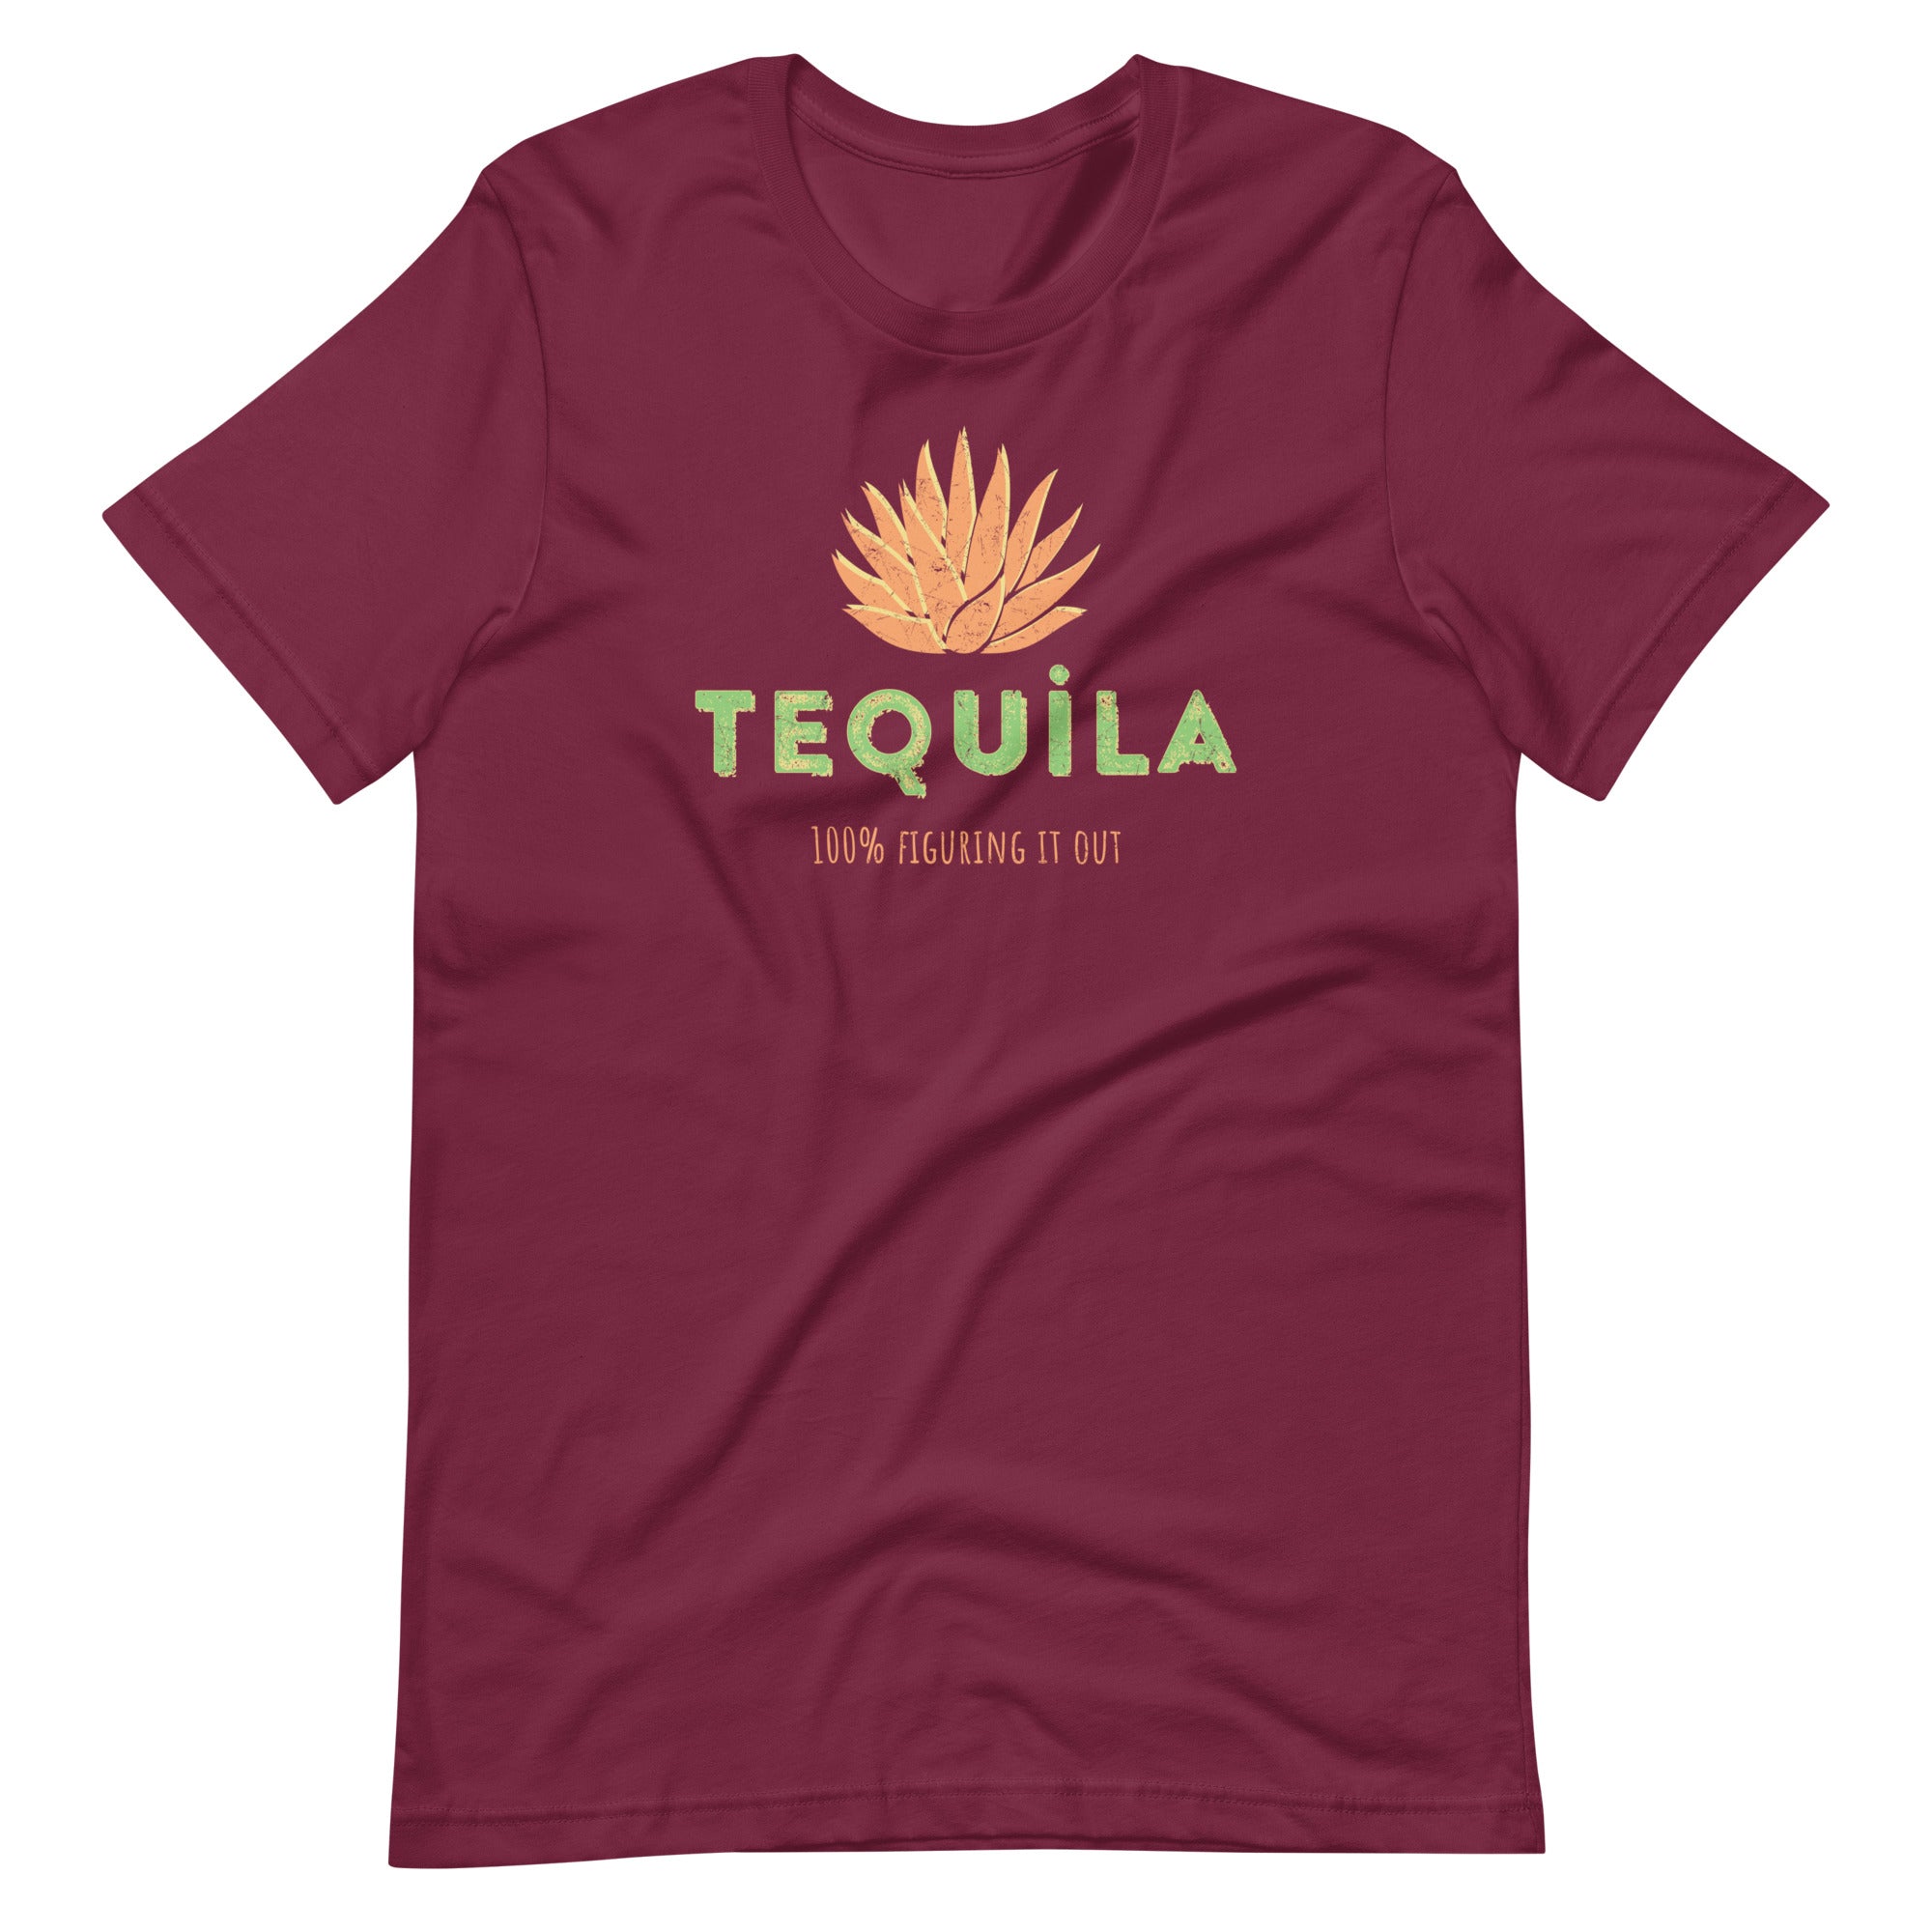 tequila-unisex-staple-t-shirt-maroon-front